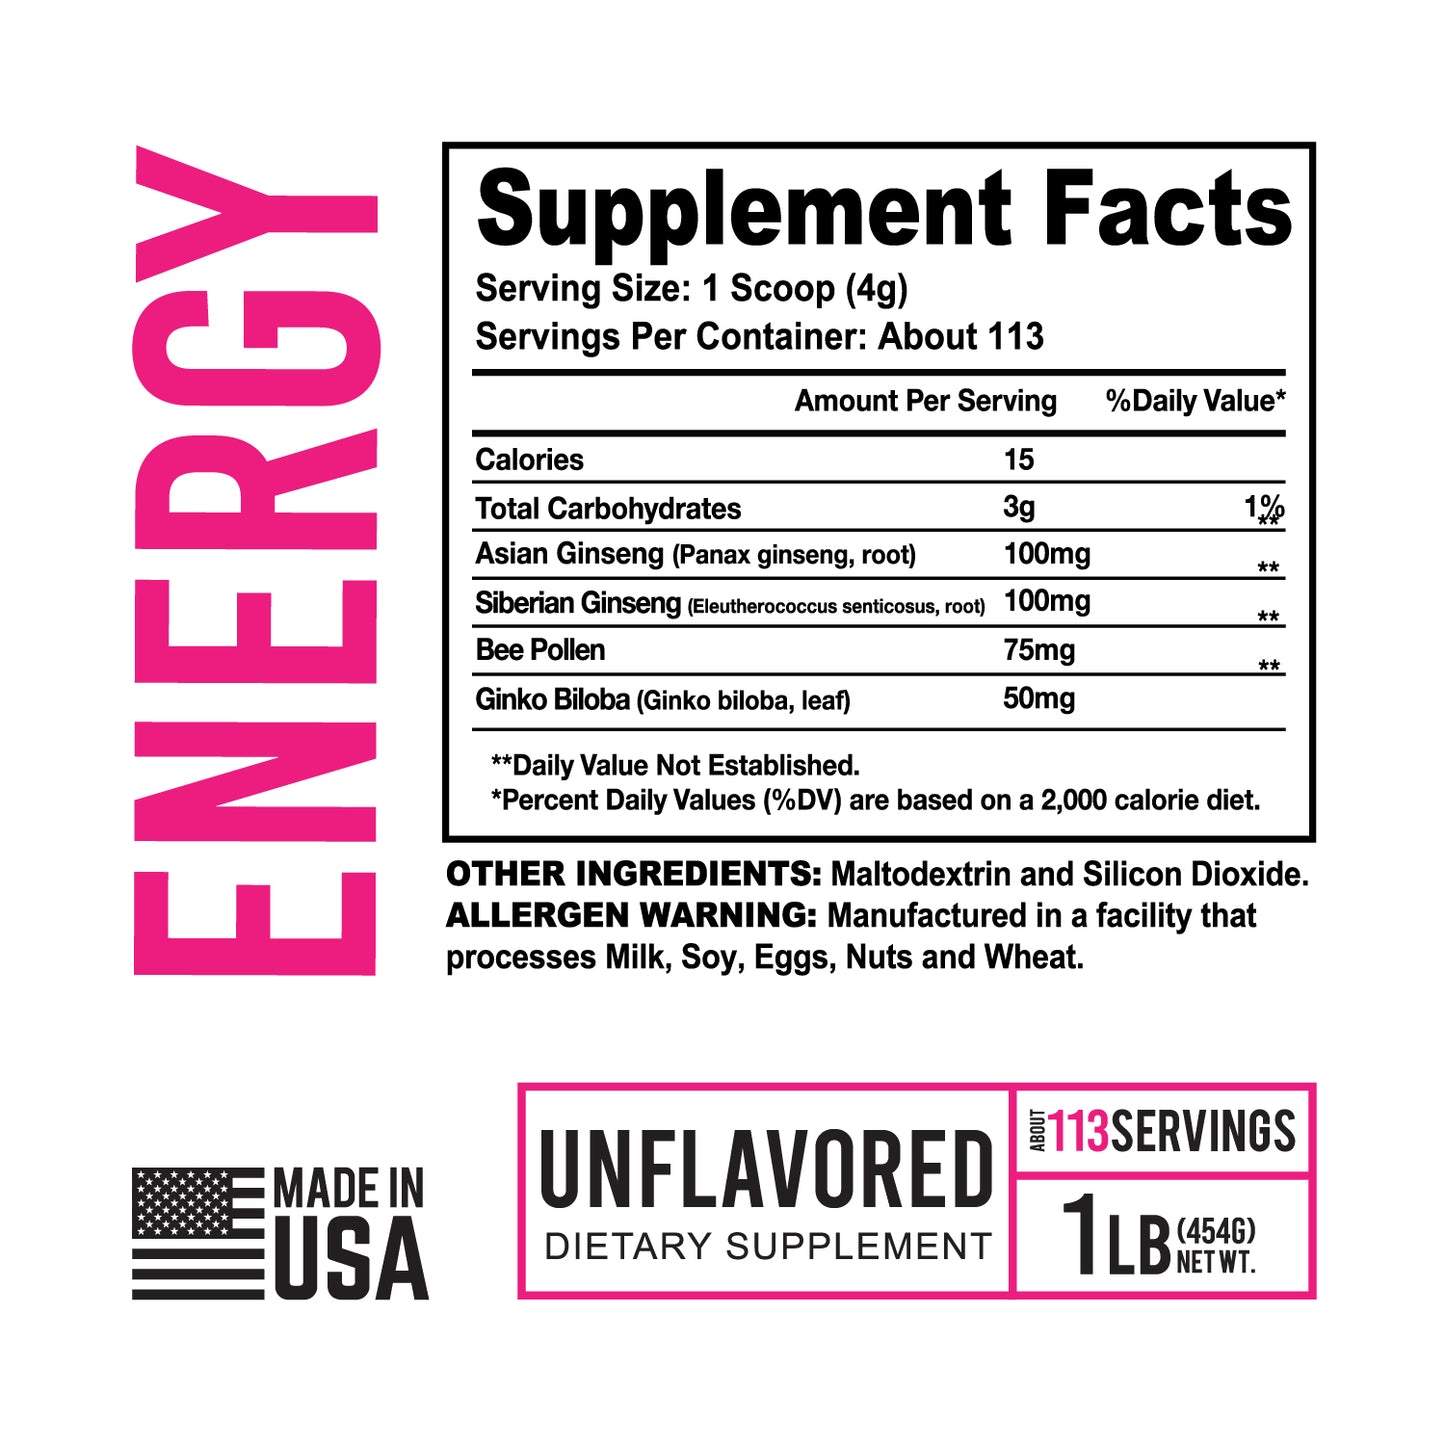 Strong Her Energy Boost Supplement | 1lb Unflavored Powder